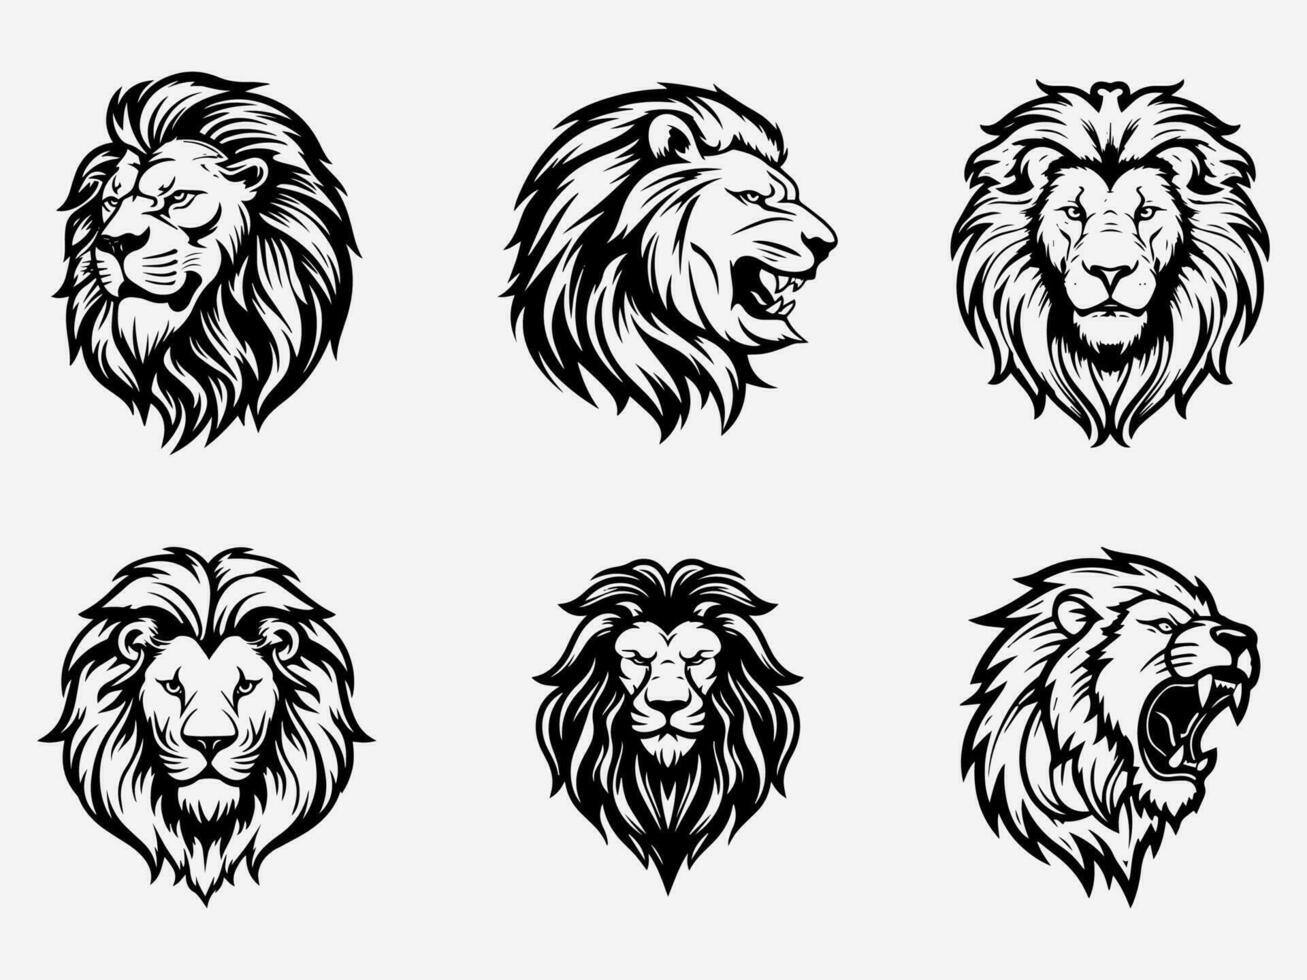 Hand drawn lion logo design illustration, showcasing strength, power, and leadership with an artistic touch vector